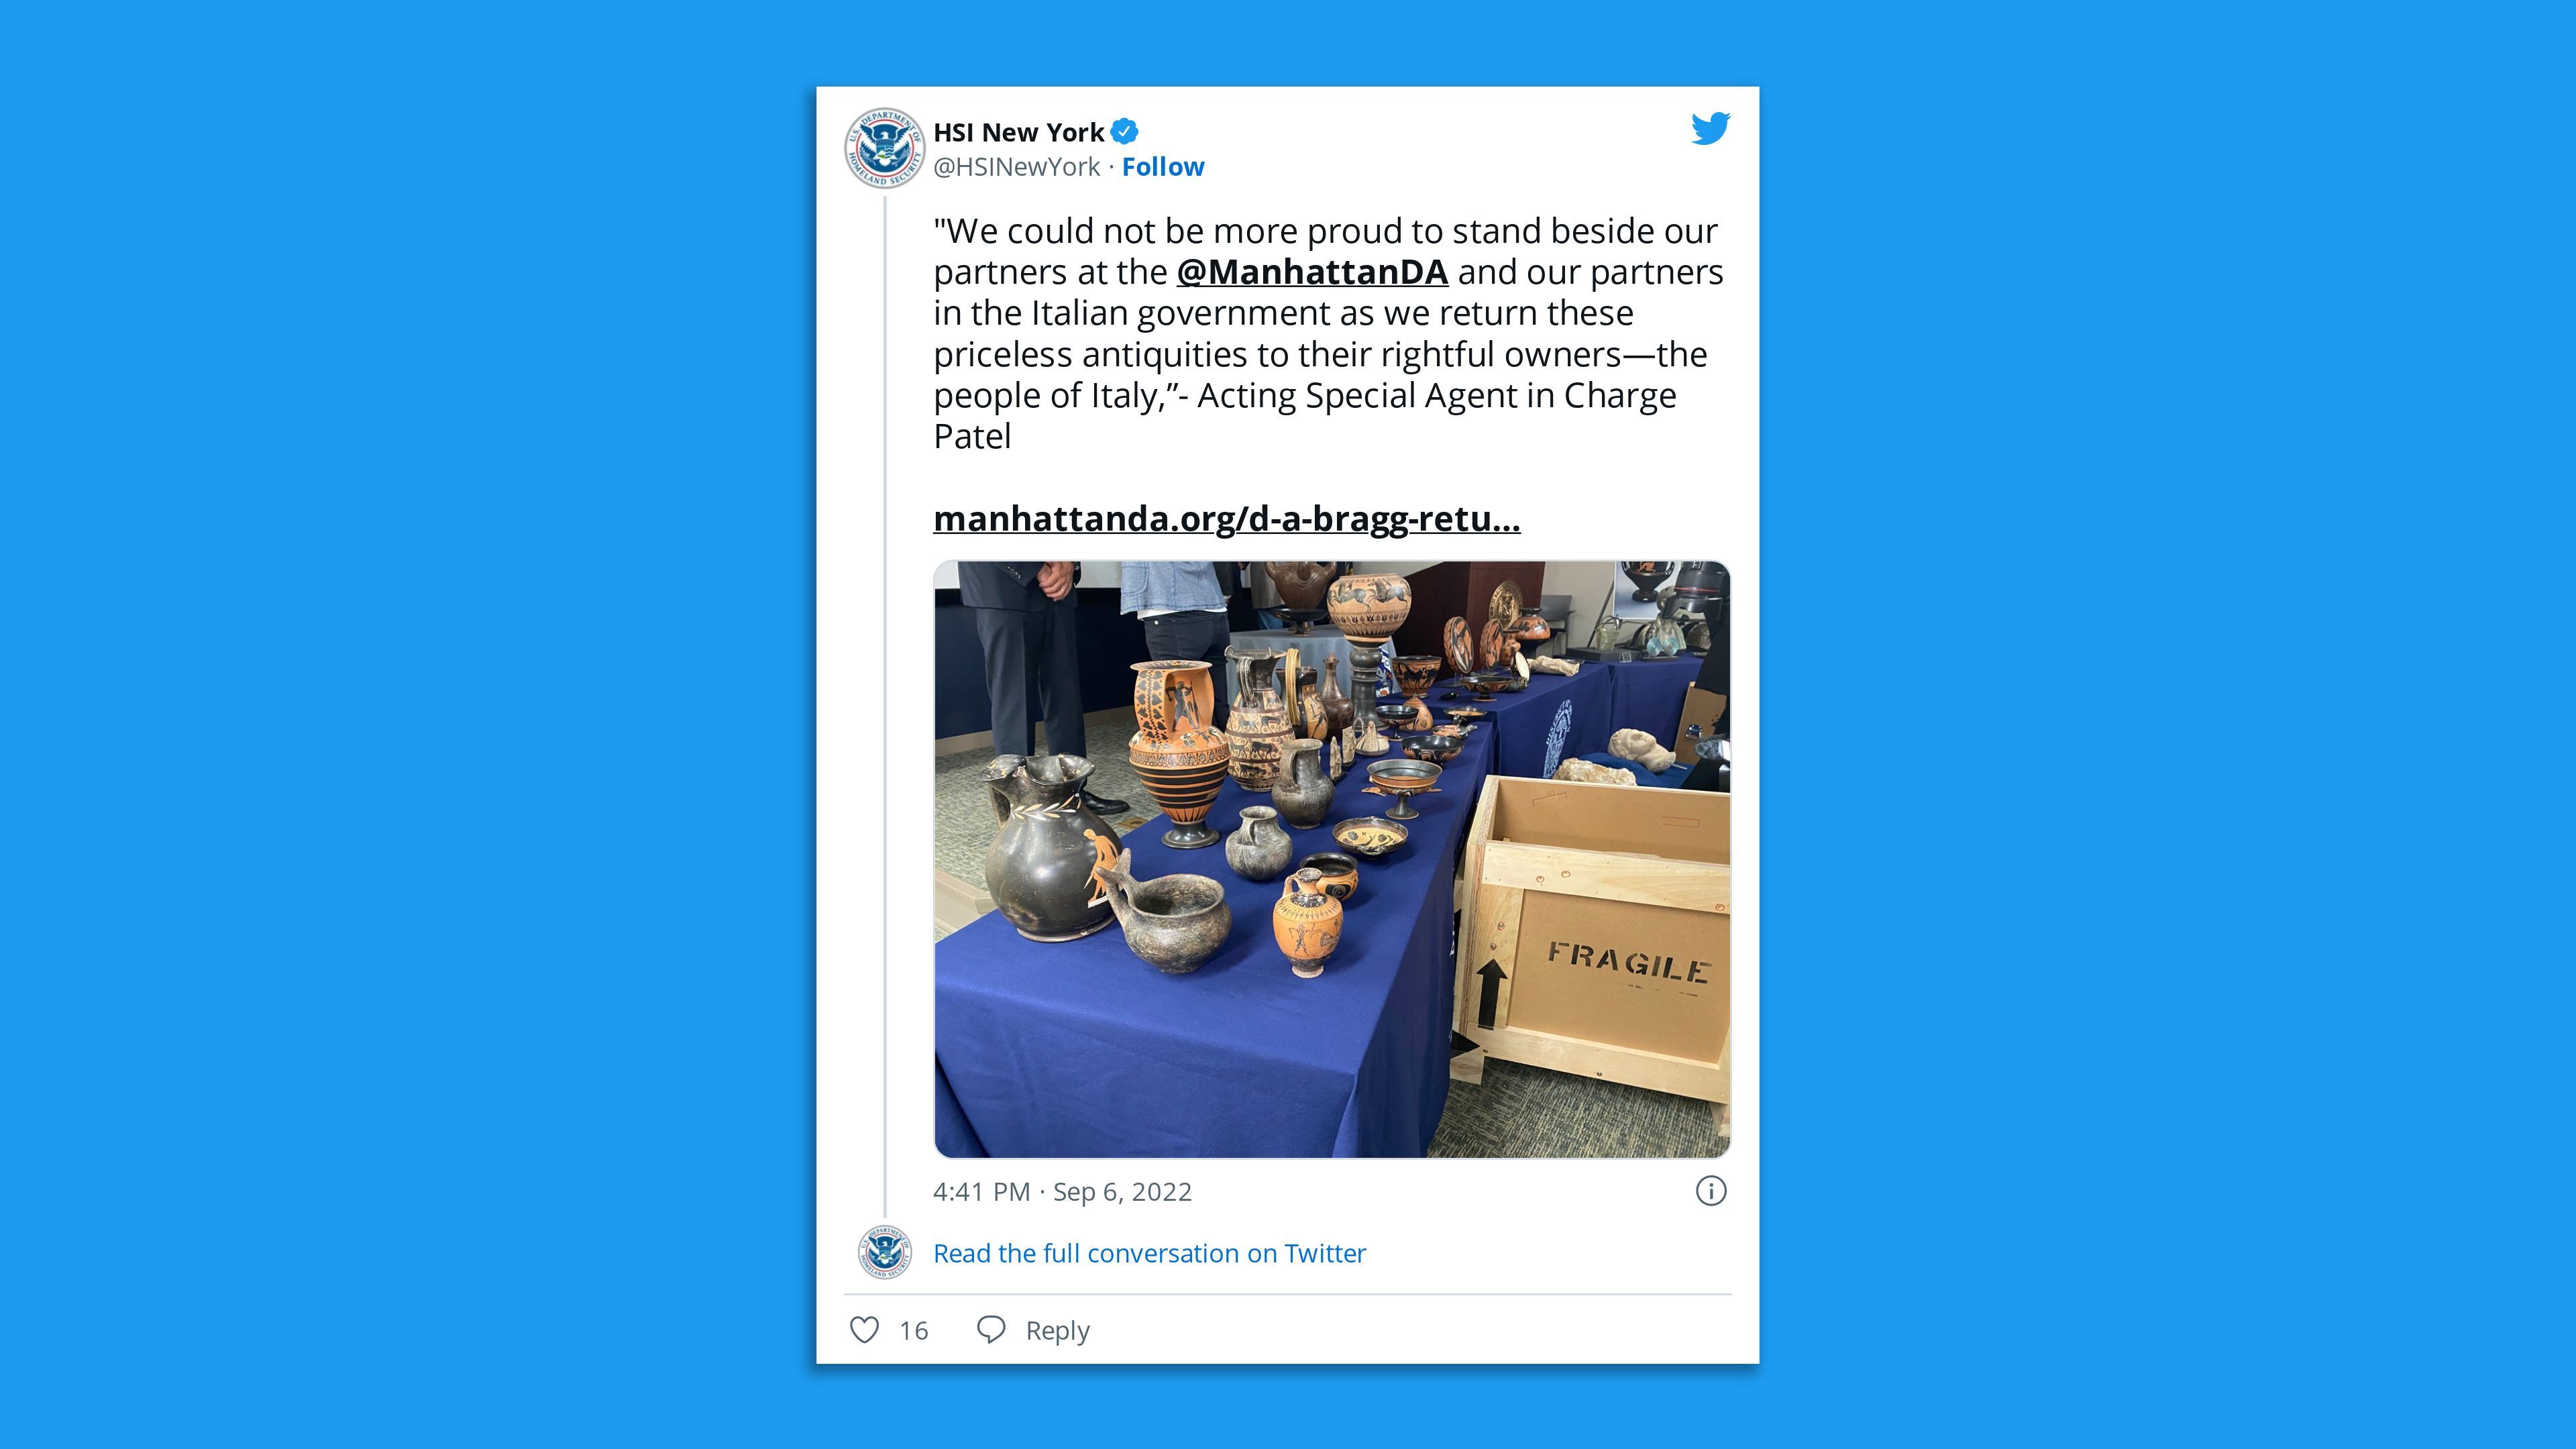 A screenshot of an HSI New York Twitter image of stolen artefacts returned to Italy.